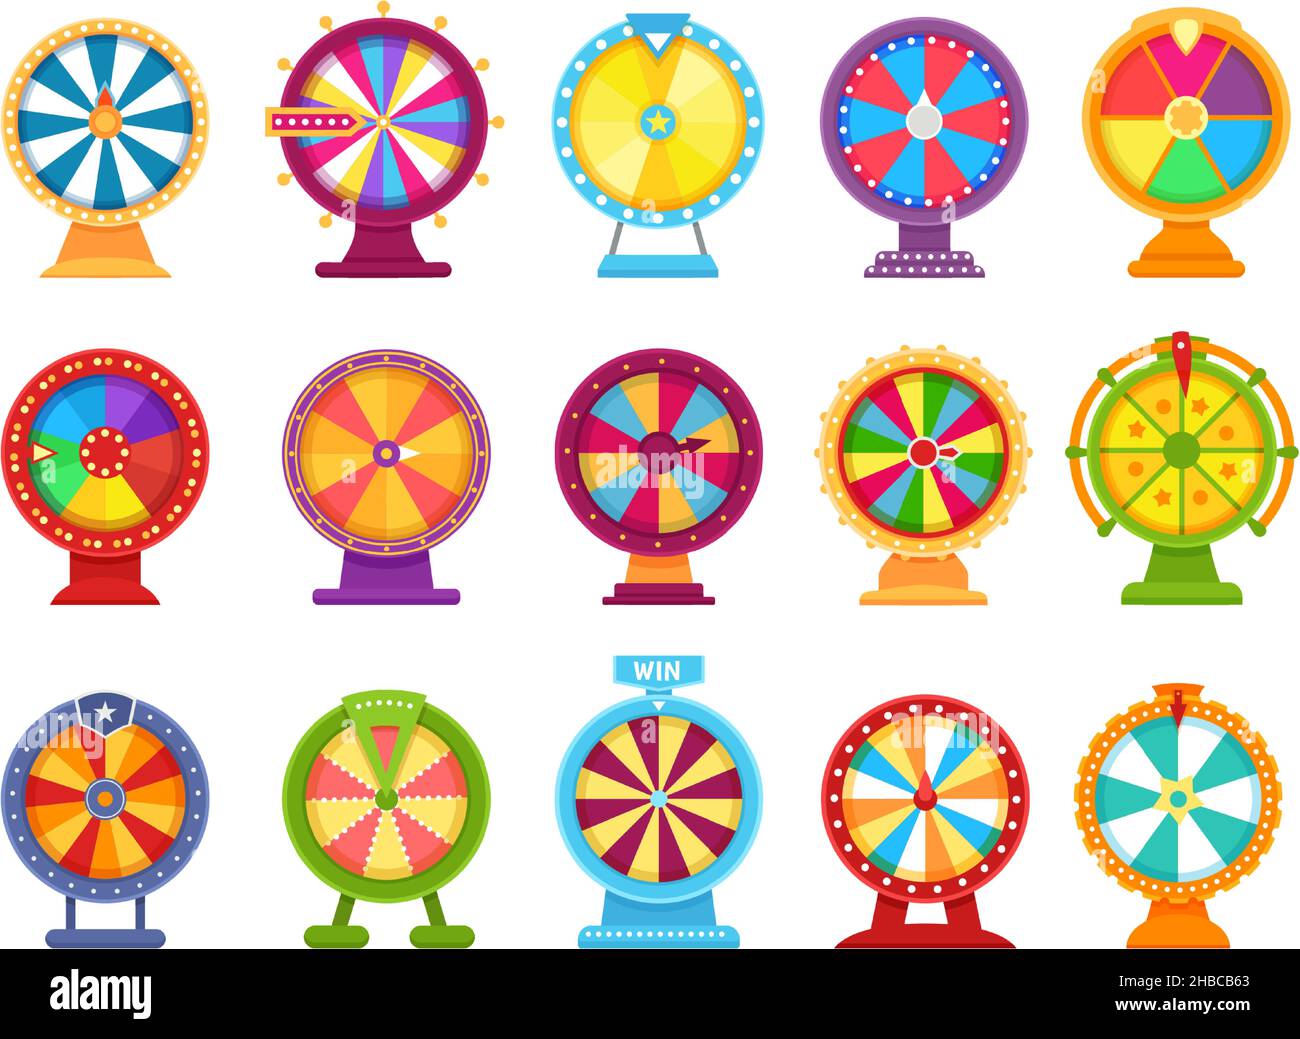 Fortune wheels, spinning roulette, lucky spin game. Casino gambling wheel, colorful turning roulette, jackpot lottery games flat vector set. Opportunity to win or lose, entertainment Stock Vector